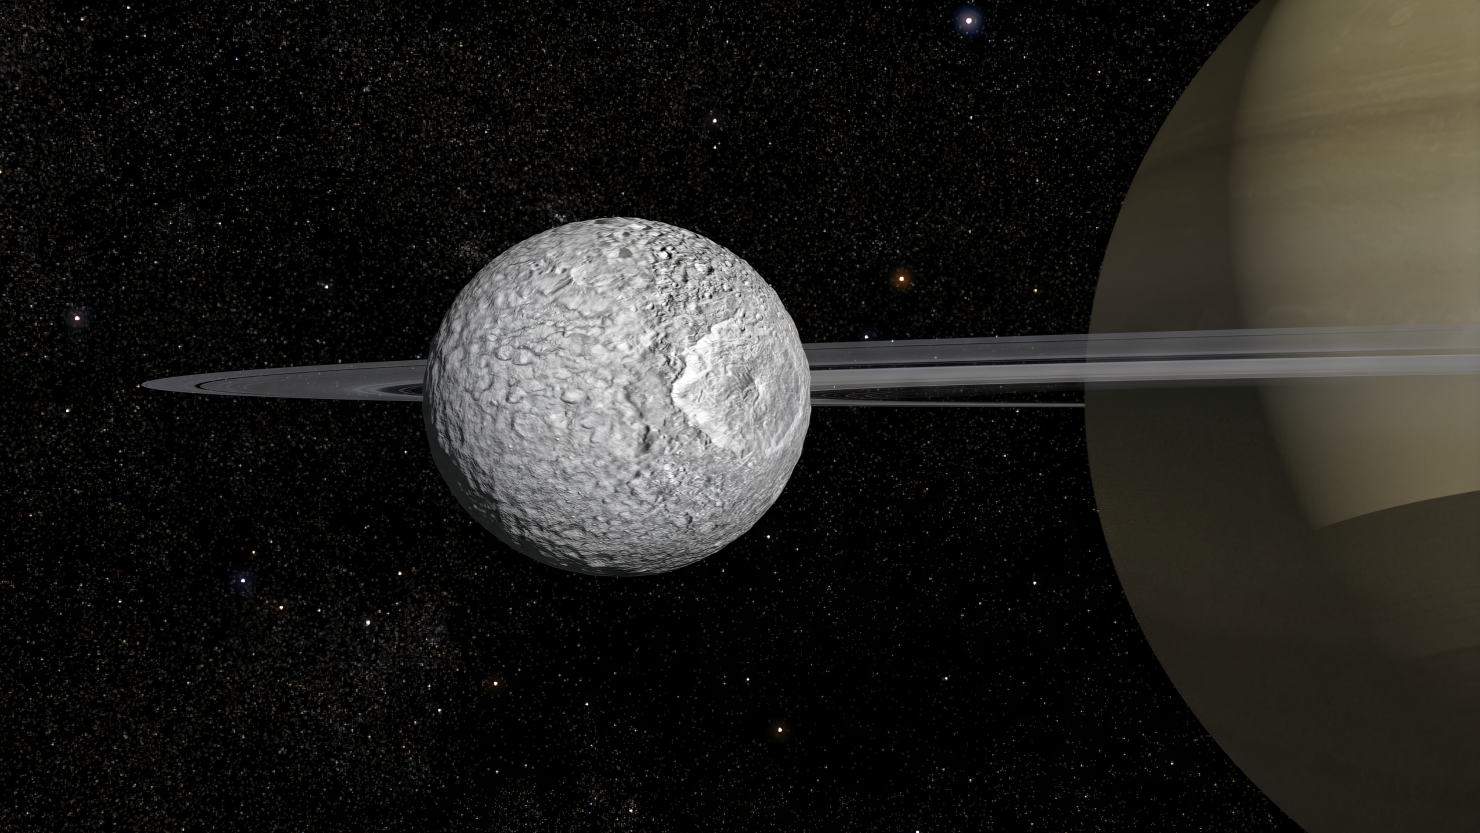 An artist's illustration depicts Mimas in orbit around Saturn. The small moon resembles the Death Star from "Star Wars" films, thanks to a massive crater.